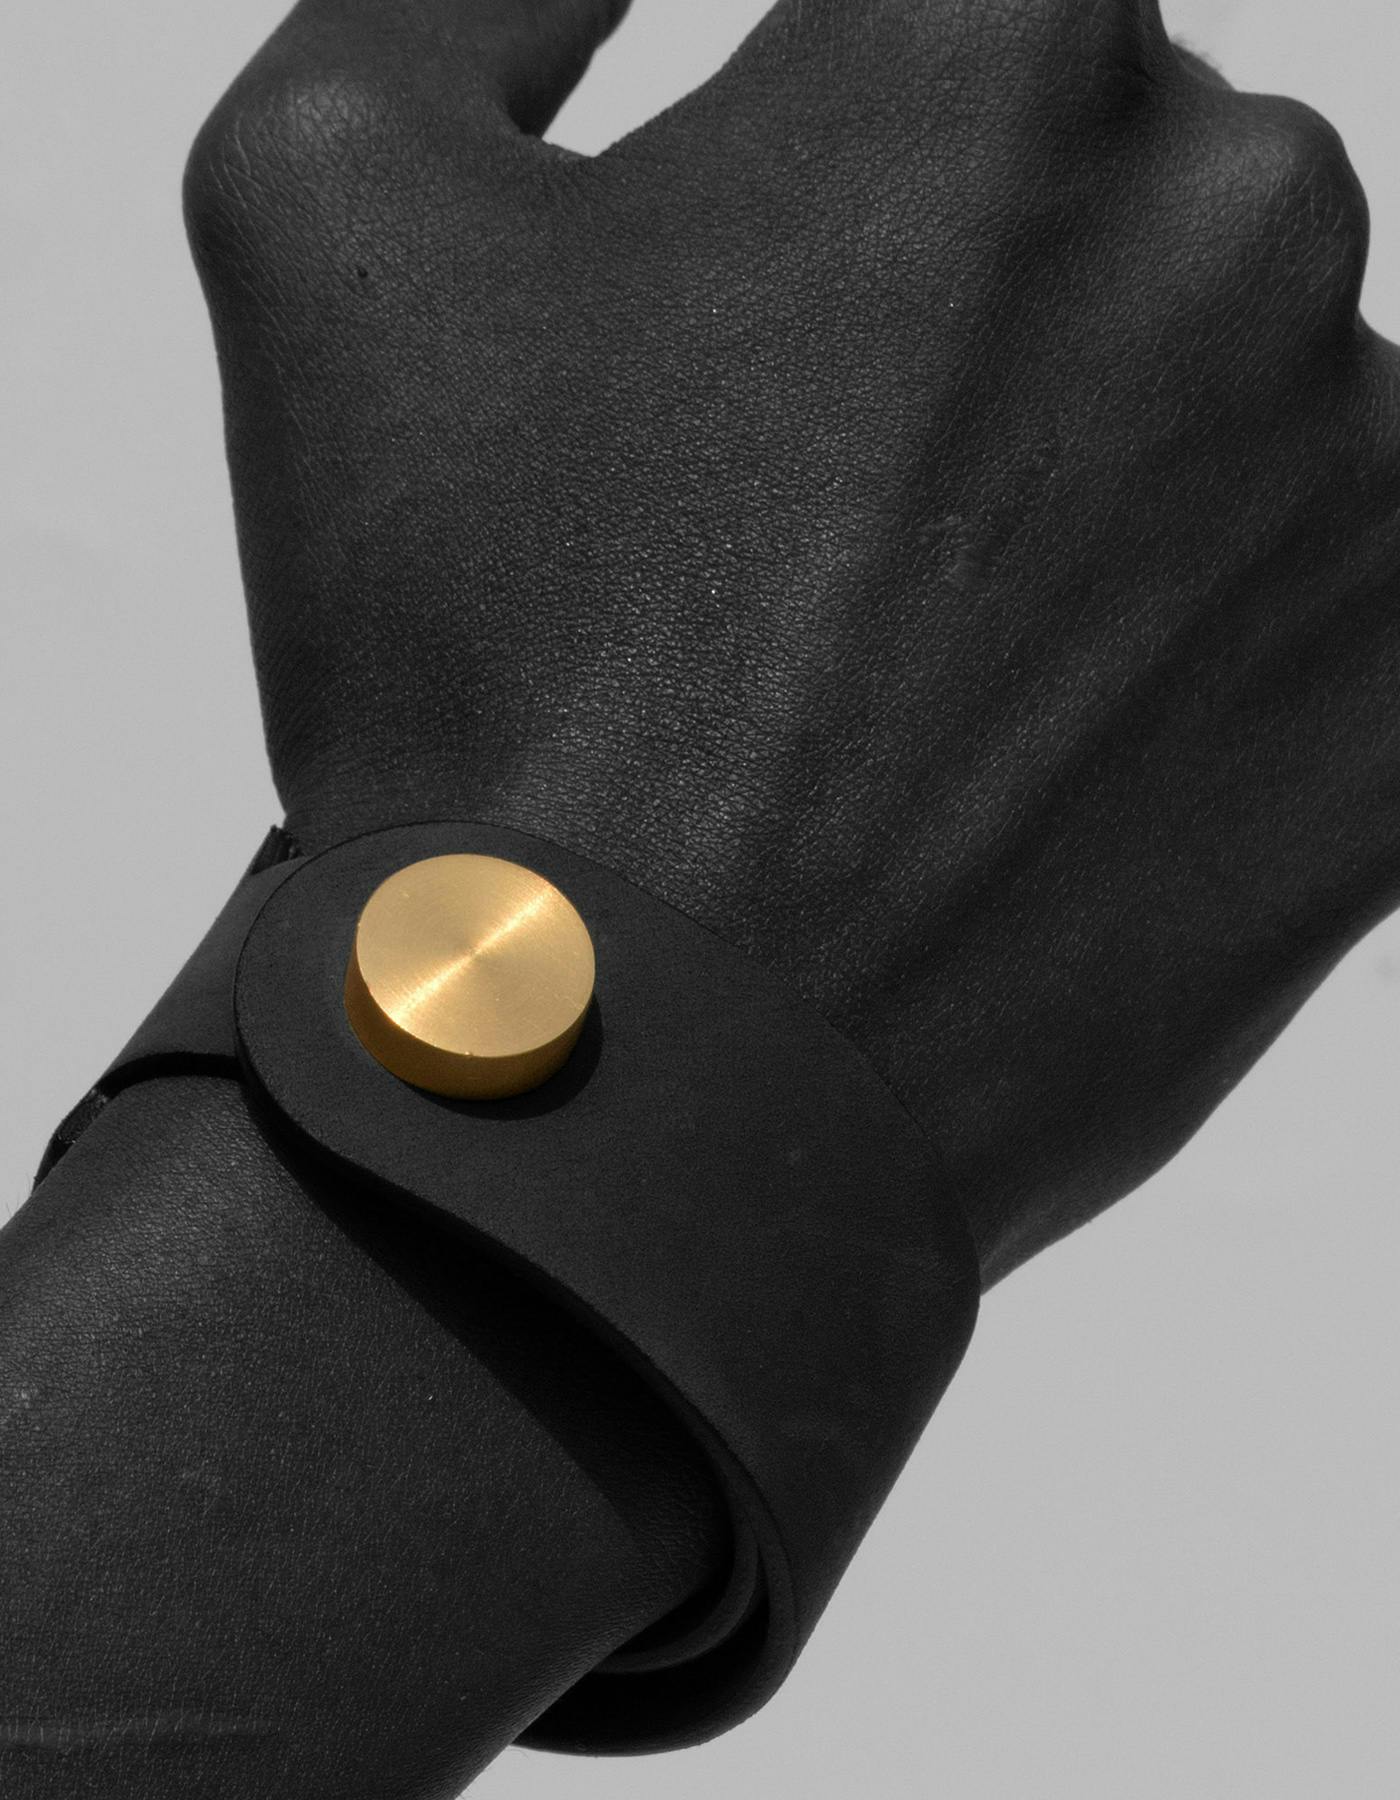 Element Wrist Band, a product by NO NA MÉ